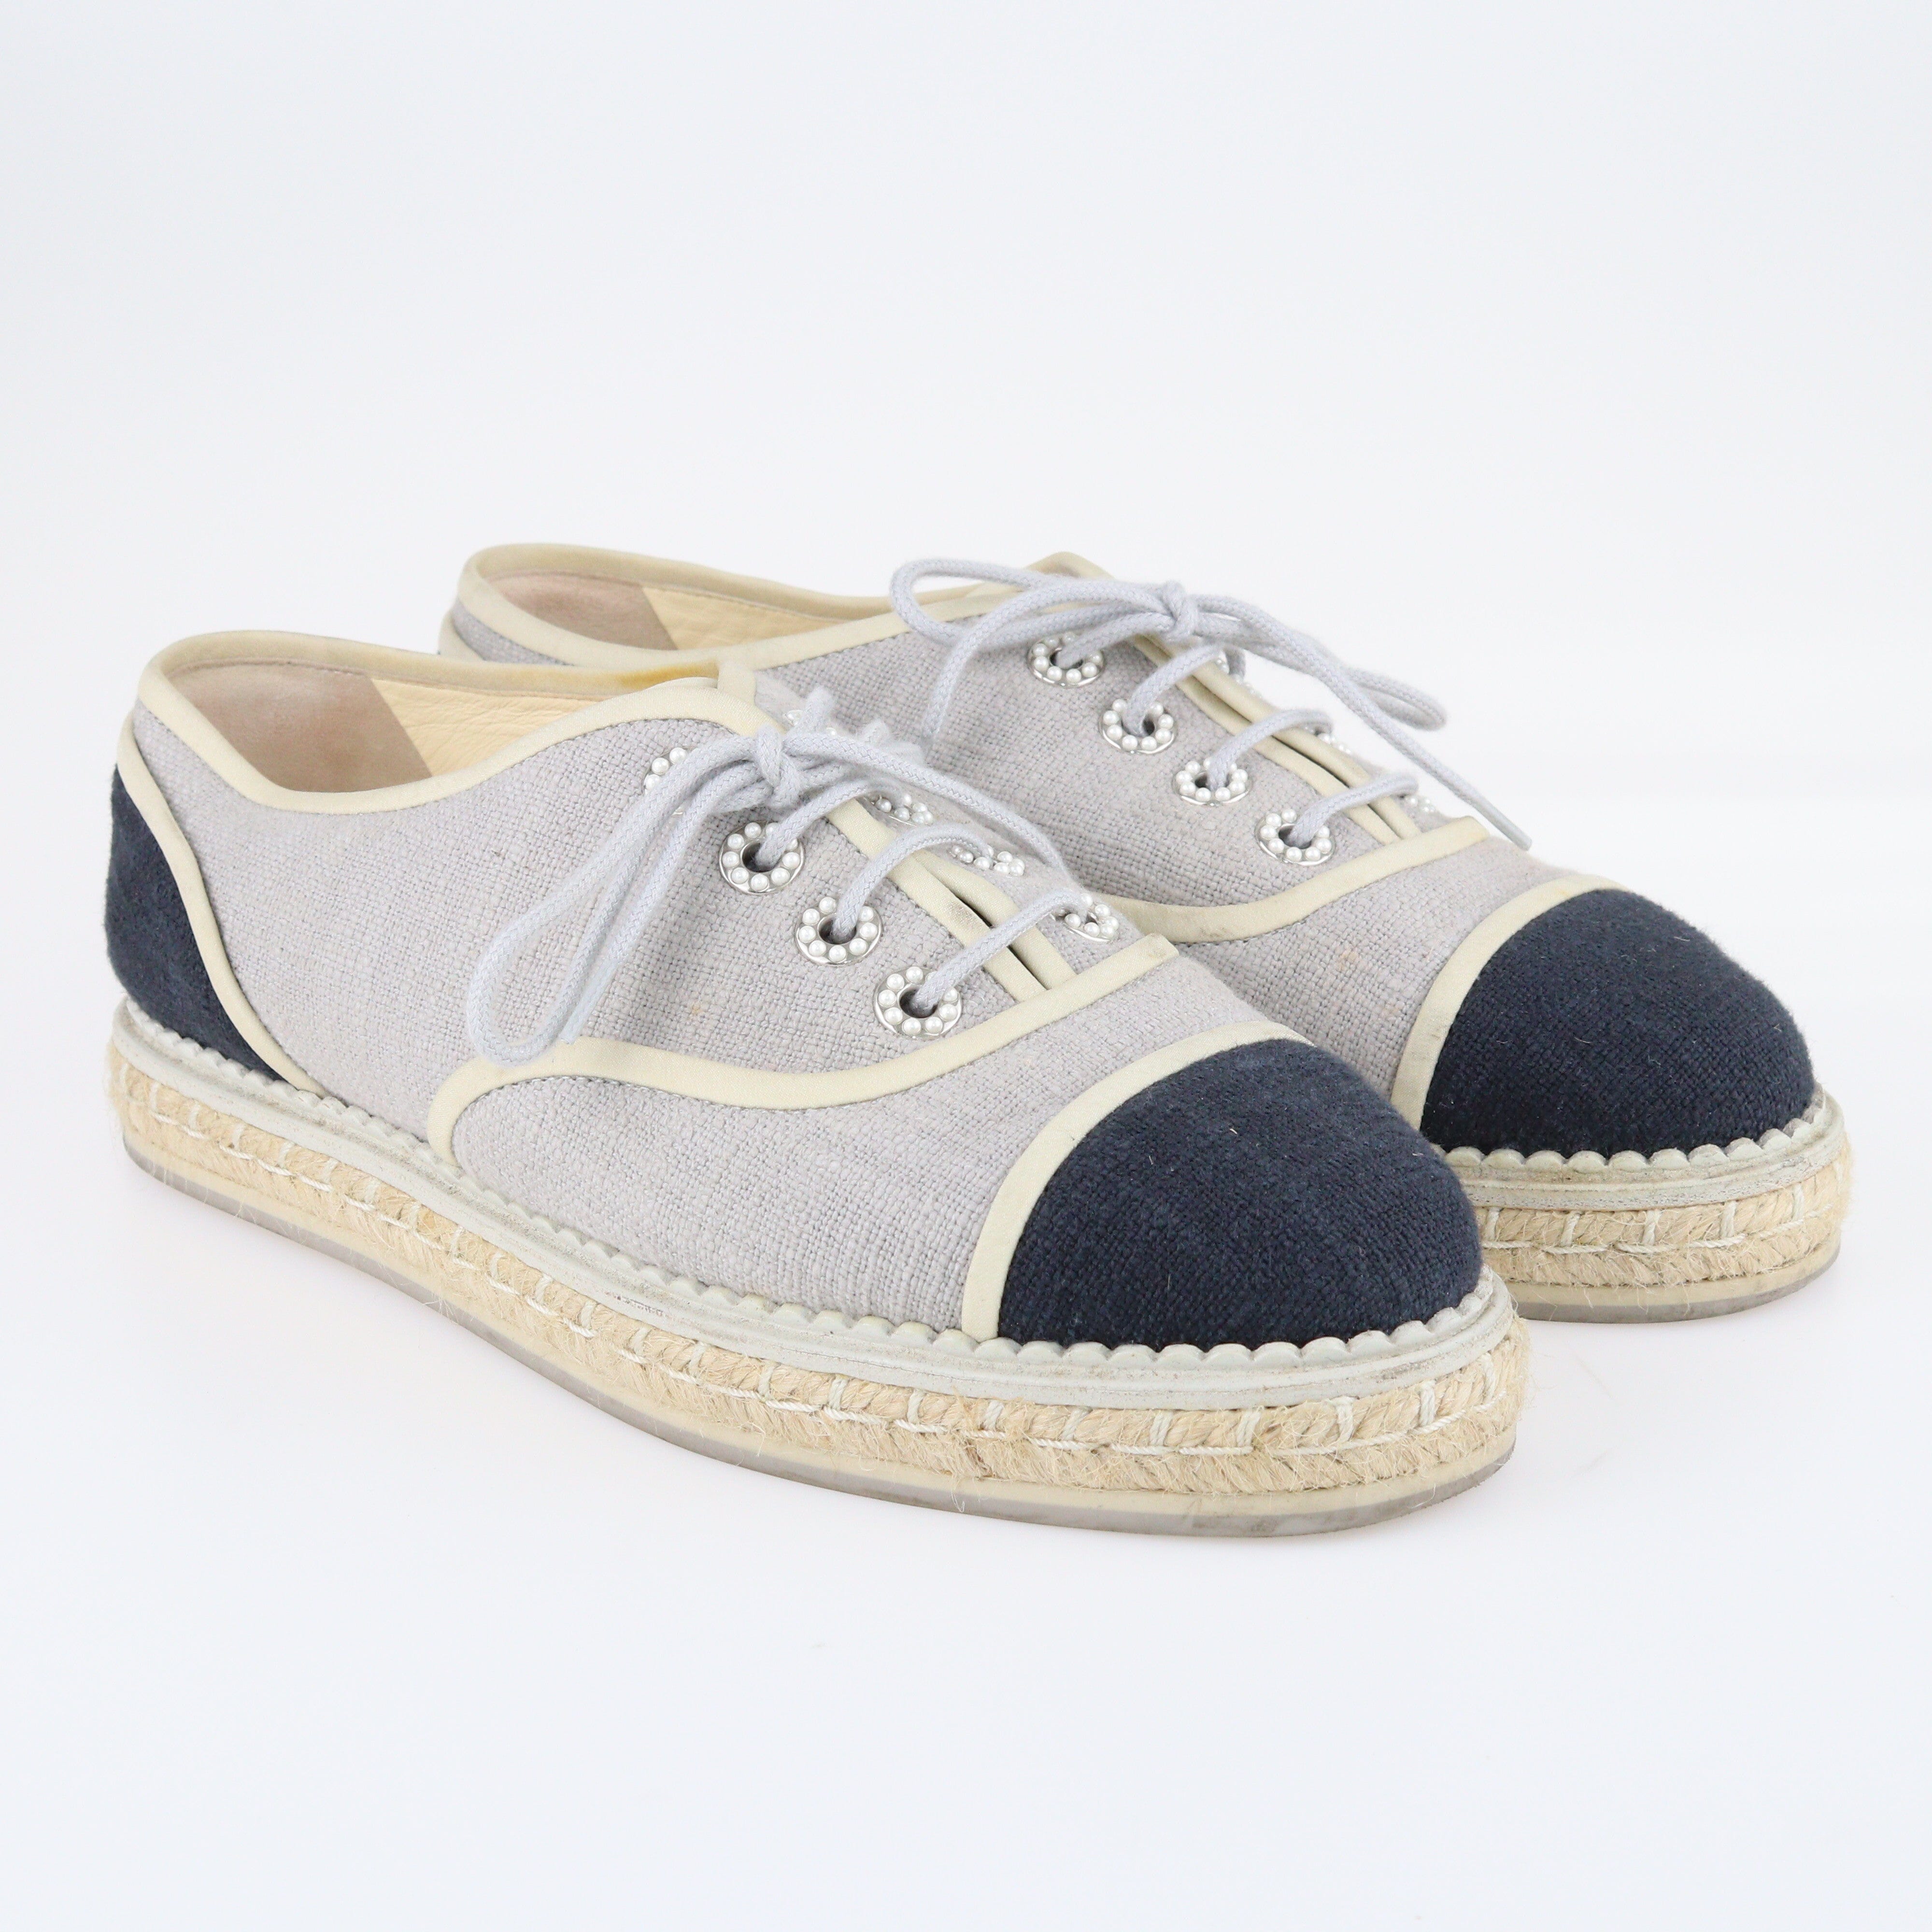 Black/Grey Lace Up Espadrilles Sneakers Shoes Chanel 